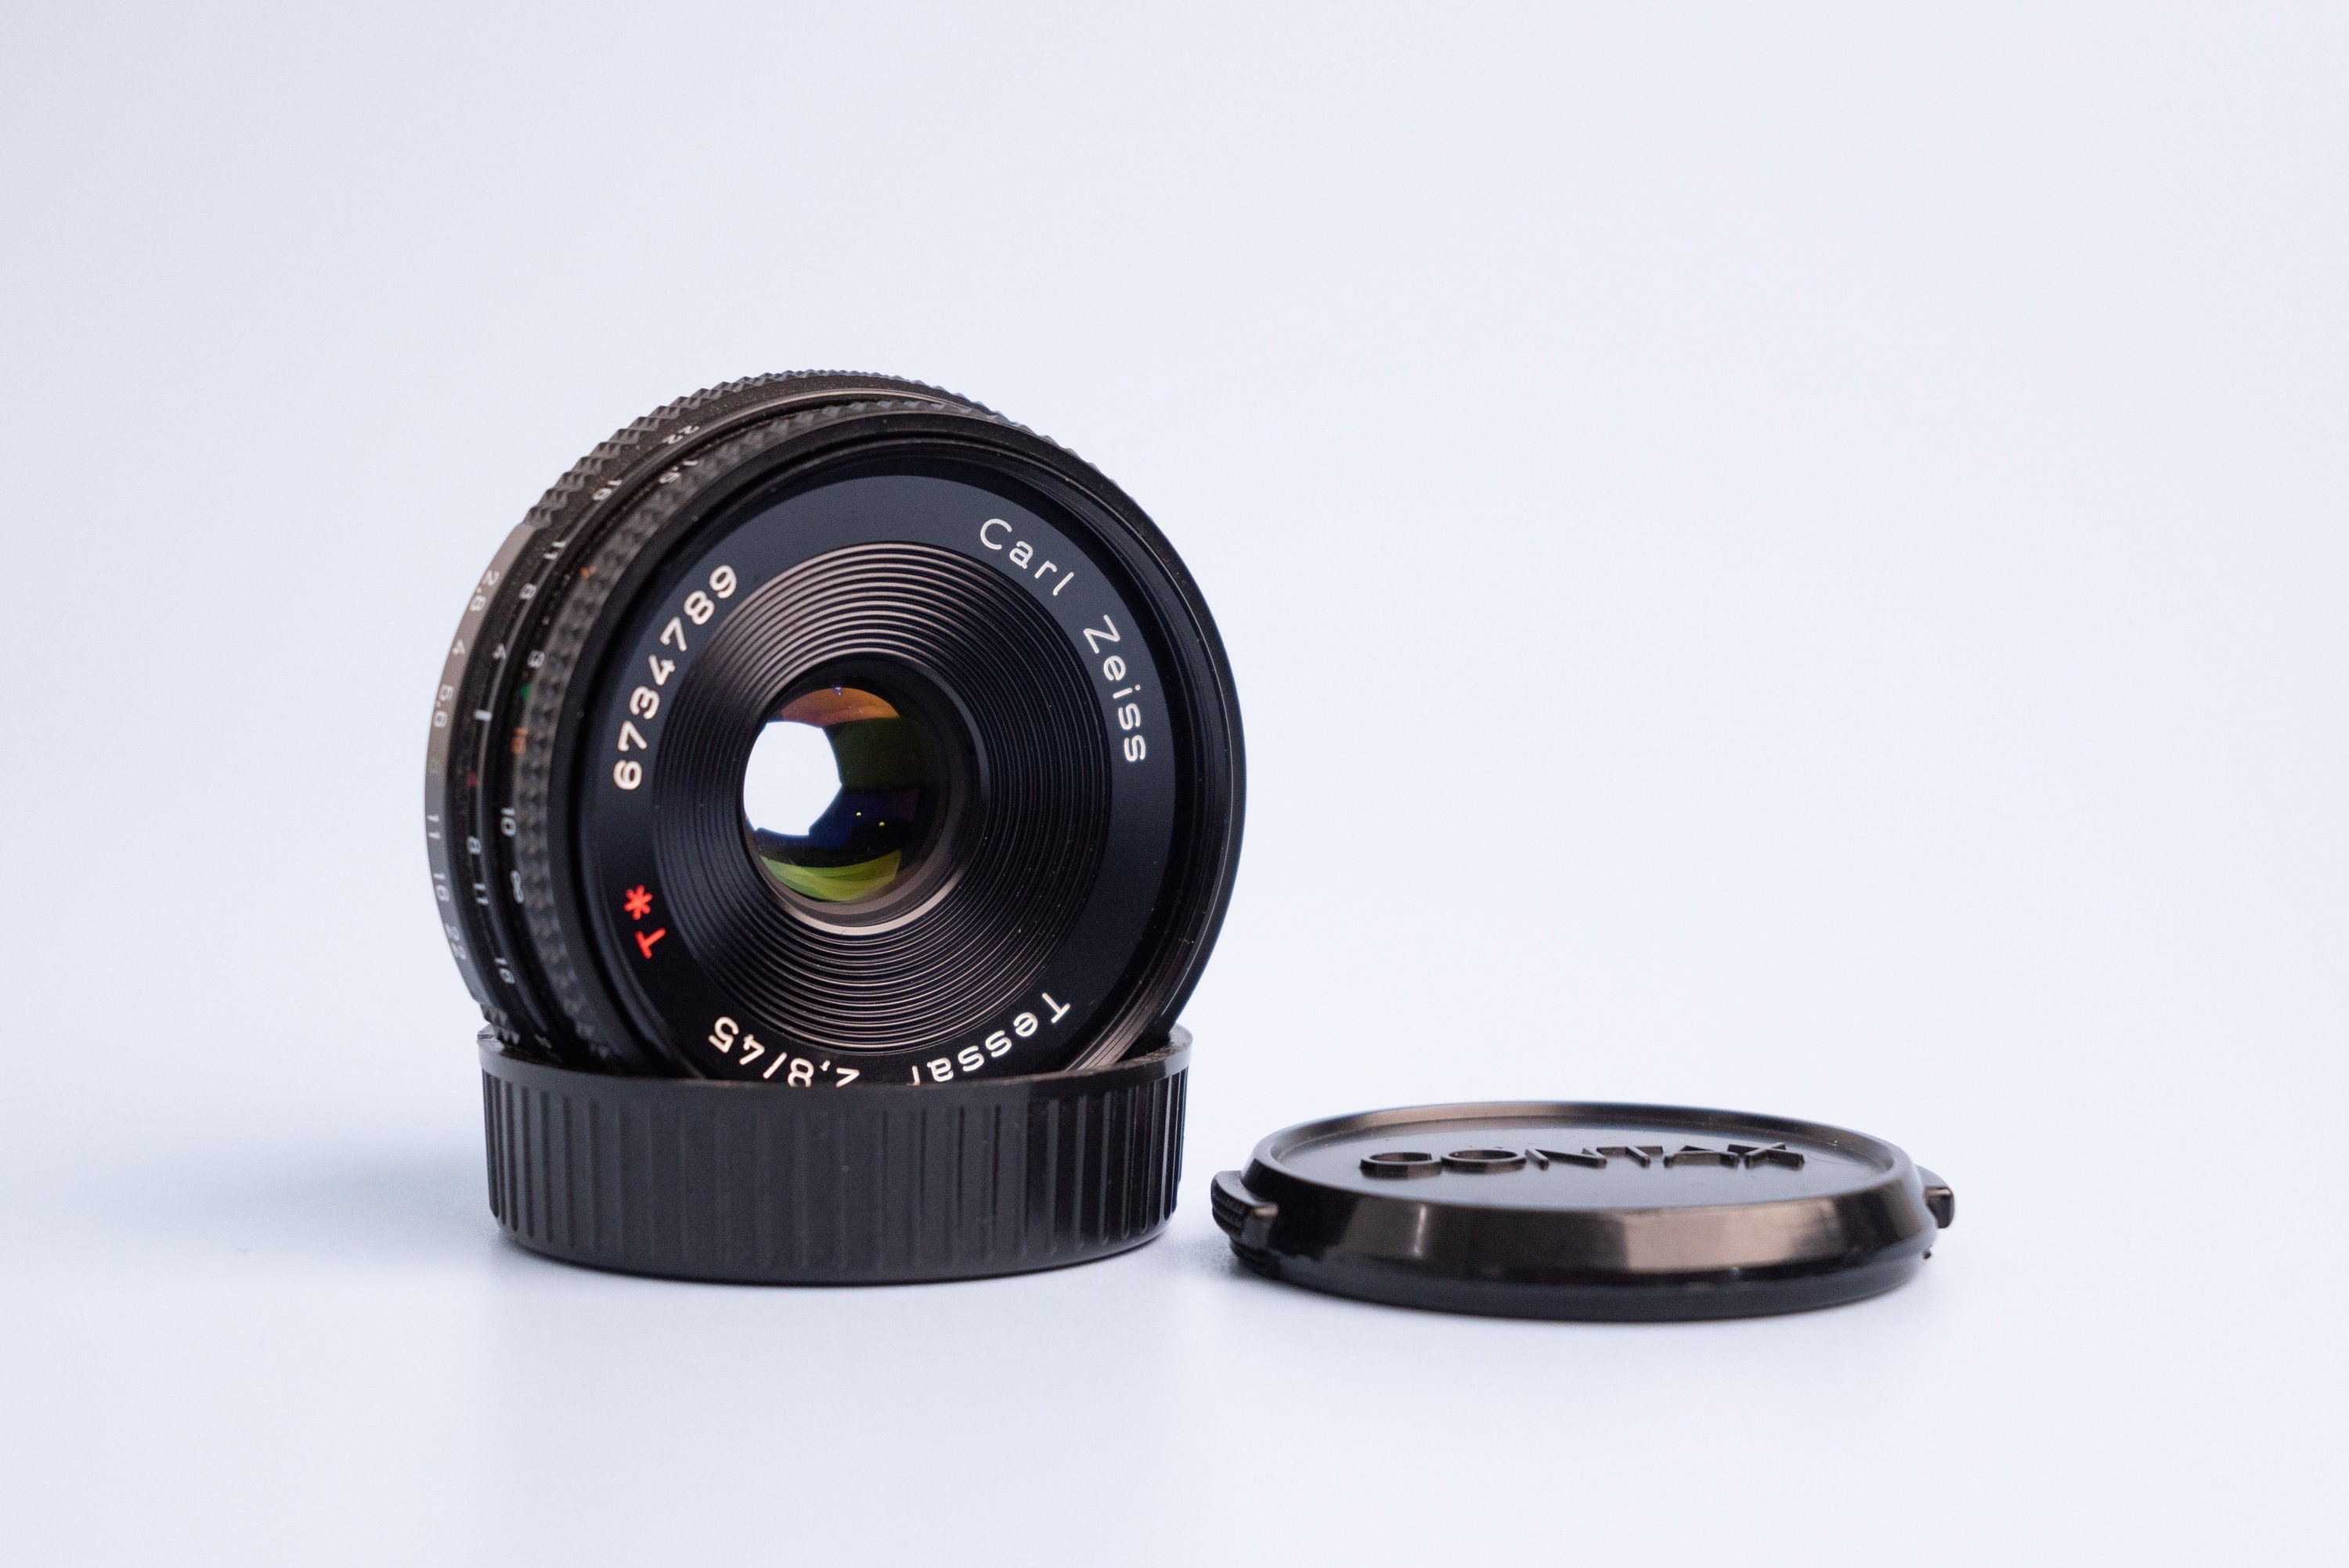 Carl Zeiss Tessar T 45mm F/2.8 Pancake Prime Lens With Caps - Etsy